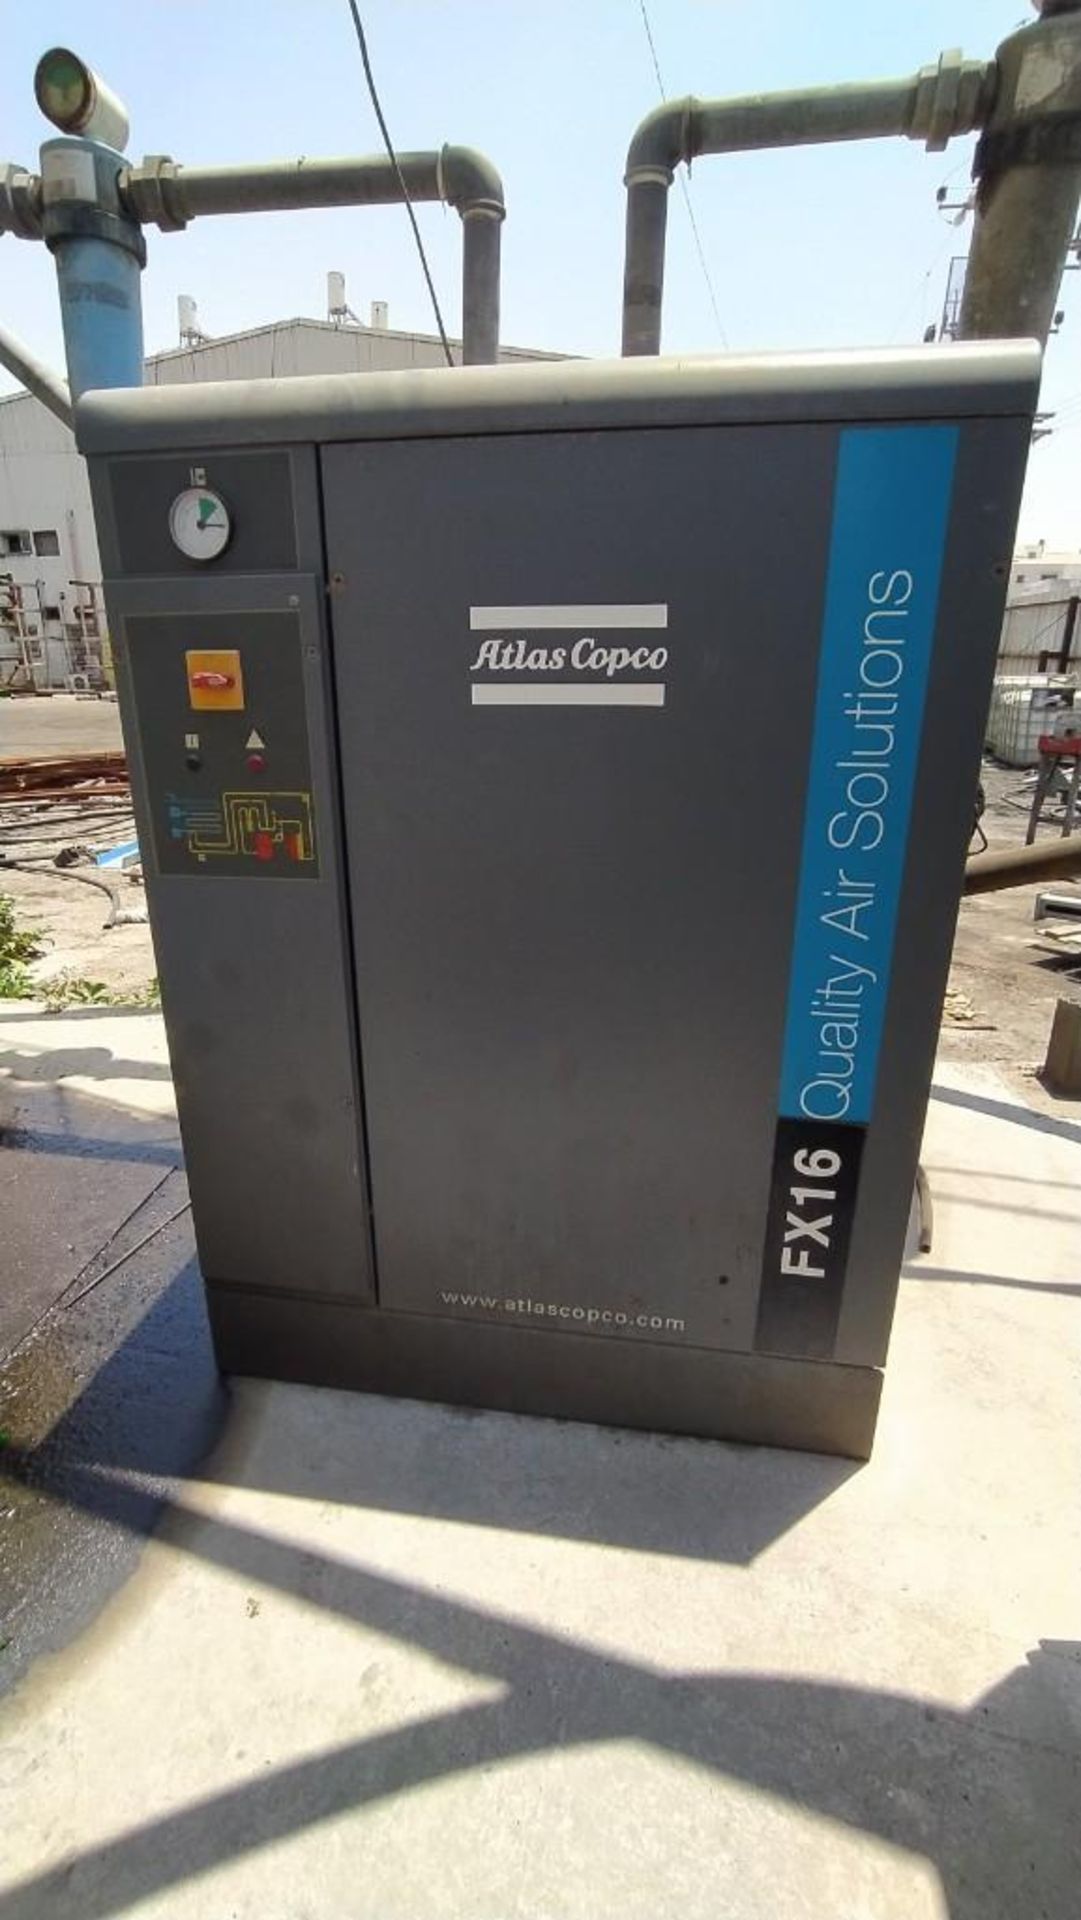 ATLAS COPCO NON-CYCLING REFRIGERATED AIR DRYER; MODEL FX16